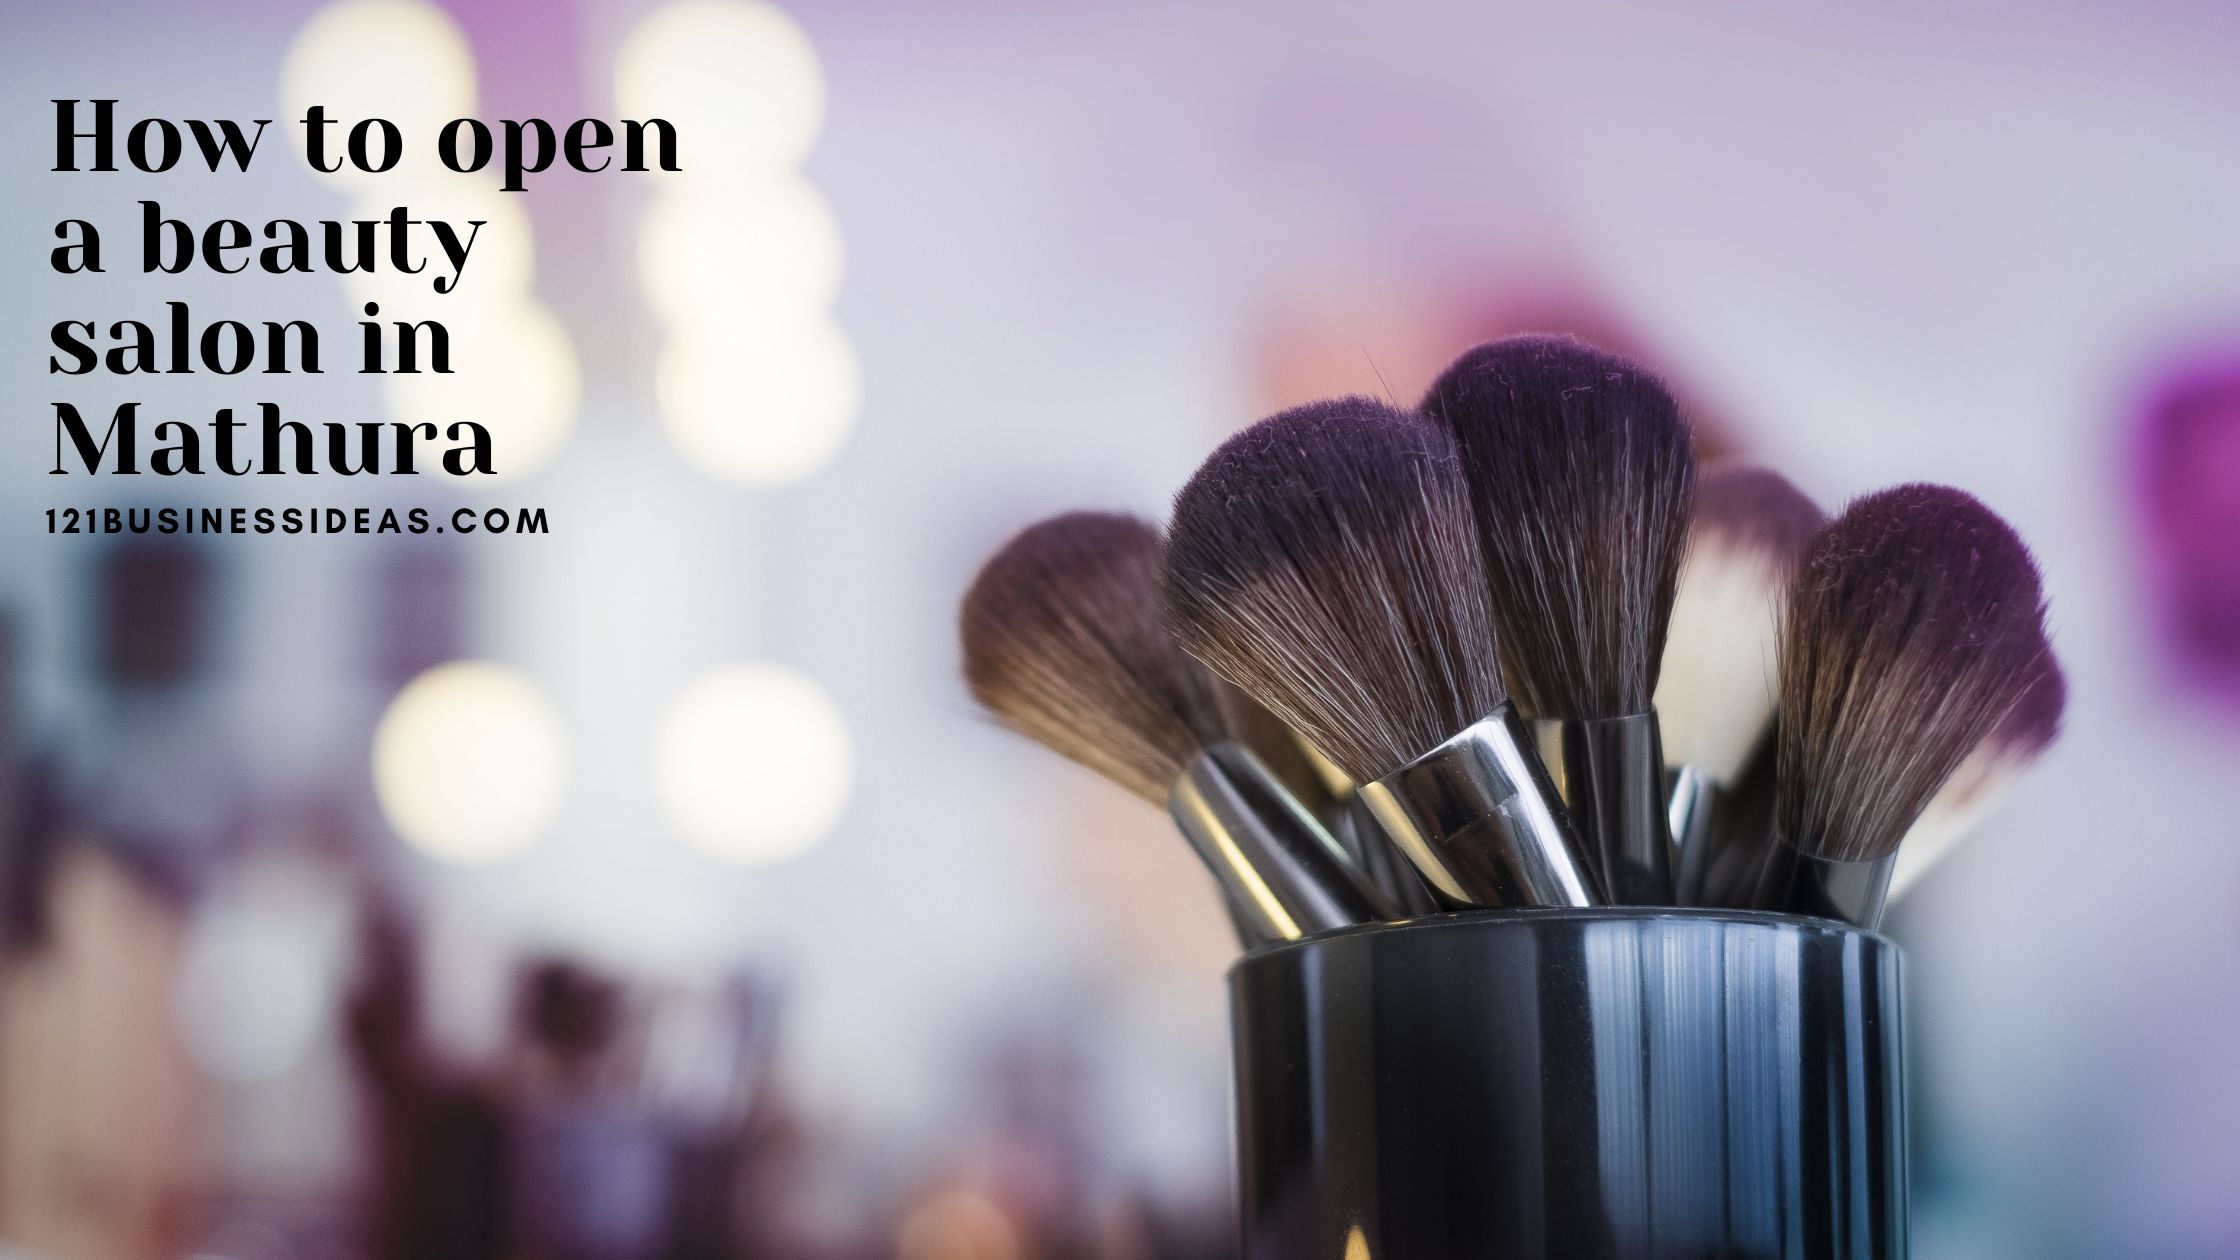 How to open a beauty salon in Mathura